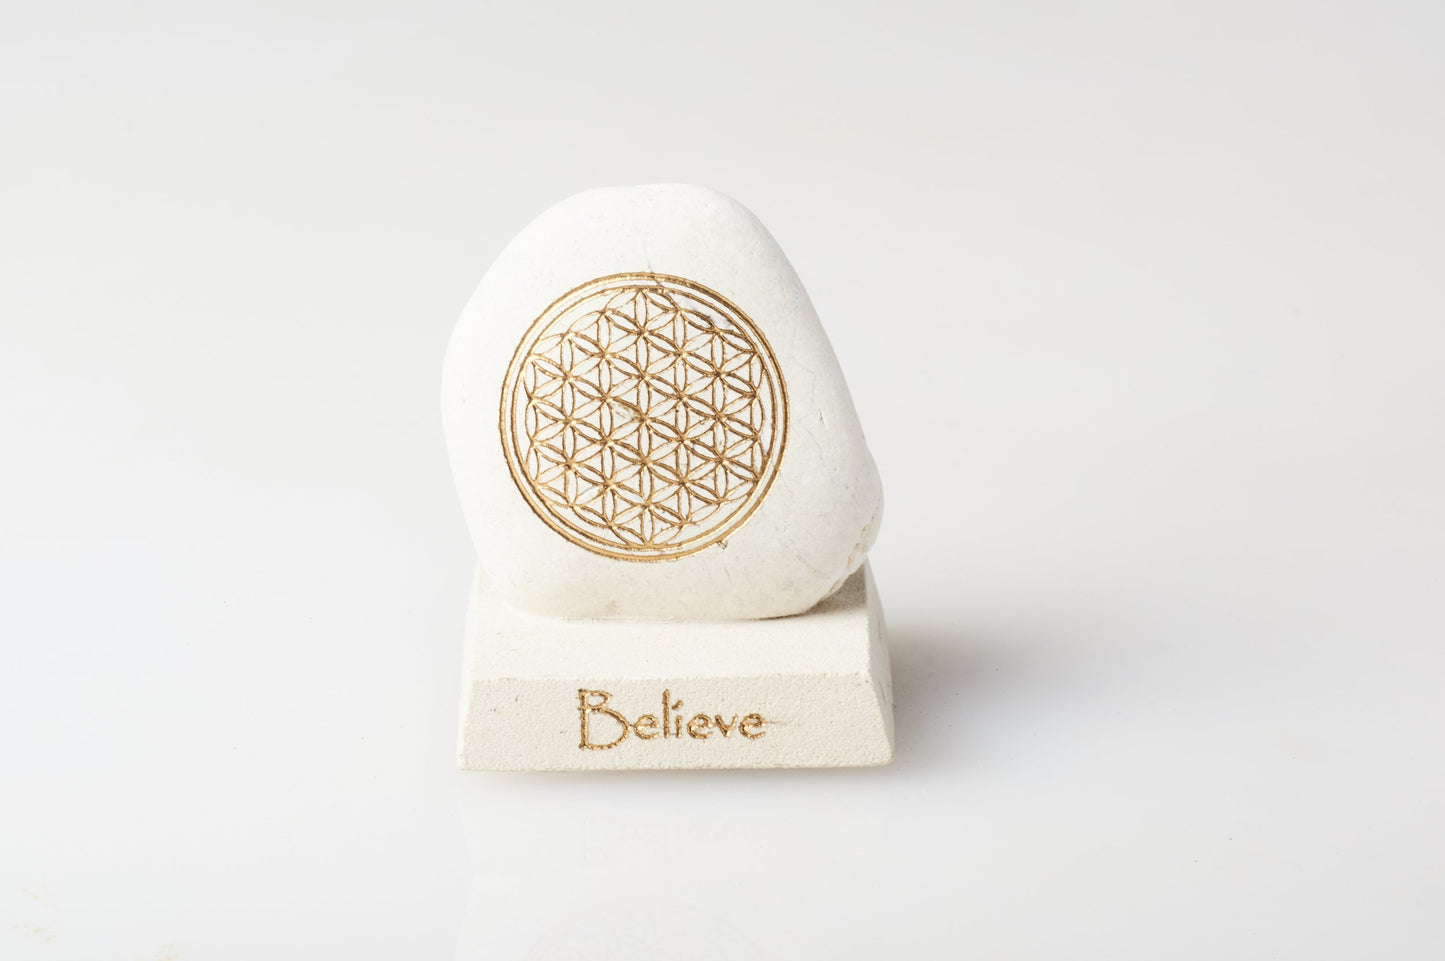 Stone Incense Holders with Painted Affirmations Assorted